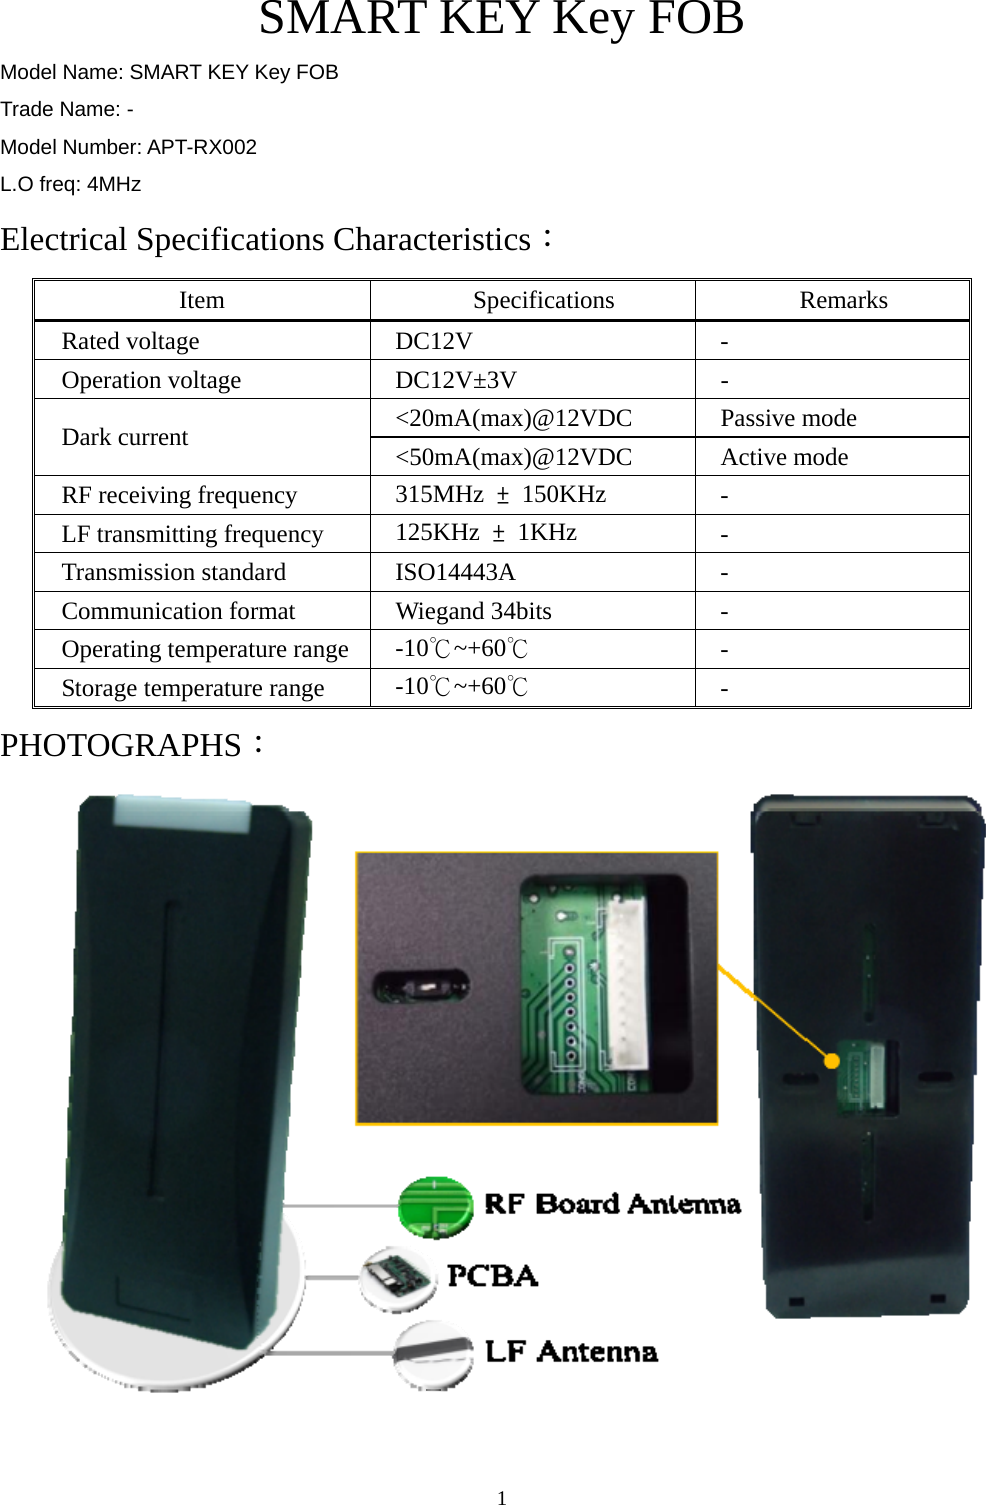  1SMART KEY Key FOB Model Name: SMART KEY Key FOB Trade Name: - Model Number: APT-RX002 L.O freq: 4MHz Electrical Specifications Characteristics： Item Specifications Remarks Rated voltage  DC12V  - Operation voltage  DC12V±3V  - &lt;20mA(max)@12VDC Passive mode Dark current  &lt;50mA(max)@12VDC Active mode RF receiving frequency  315MHz  ± 150KHz  - LF transmitting frequency  125KHz  ± 1KHz  - Transmission standard  ISO14443A  - Communication format  Wiegand 34bits  - Operating temperature range  -10℃~+60℃ - Storage temperature range  -10℃~+60℃ - PHOTOGRAPHS：  